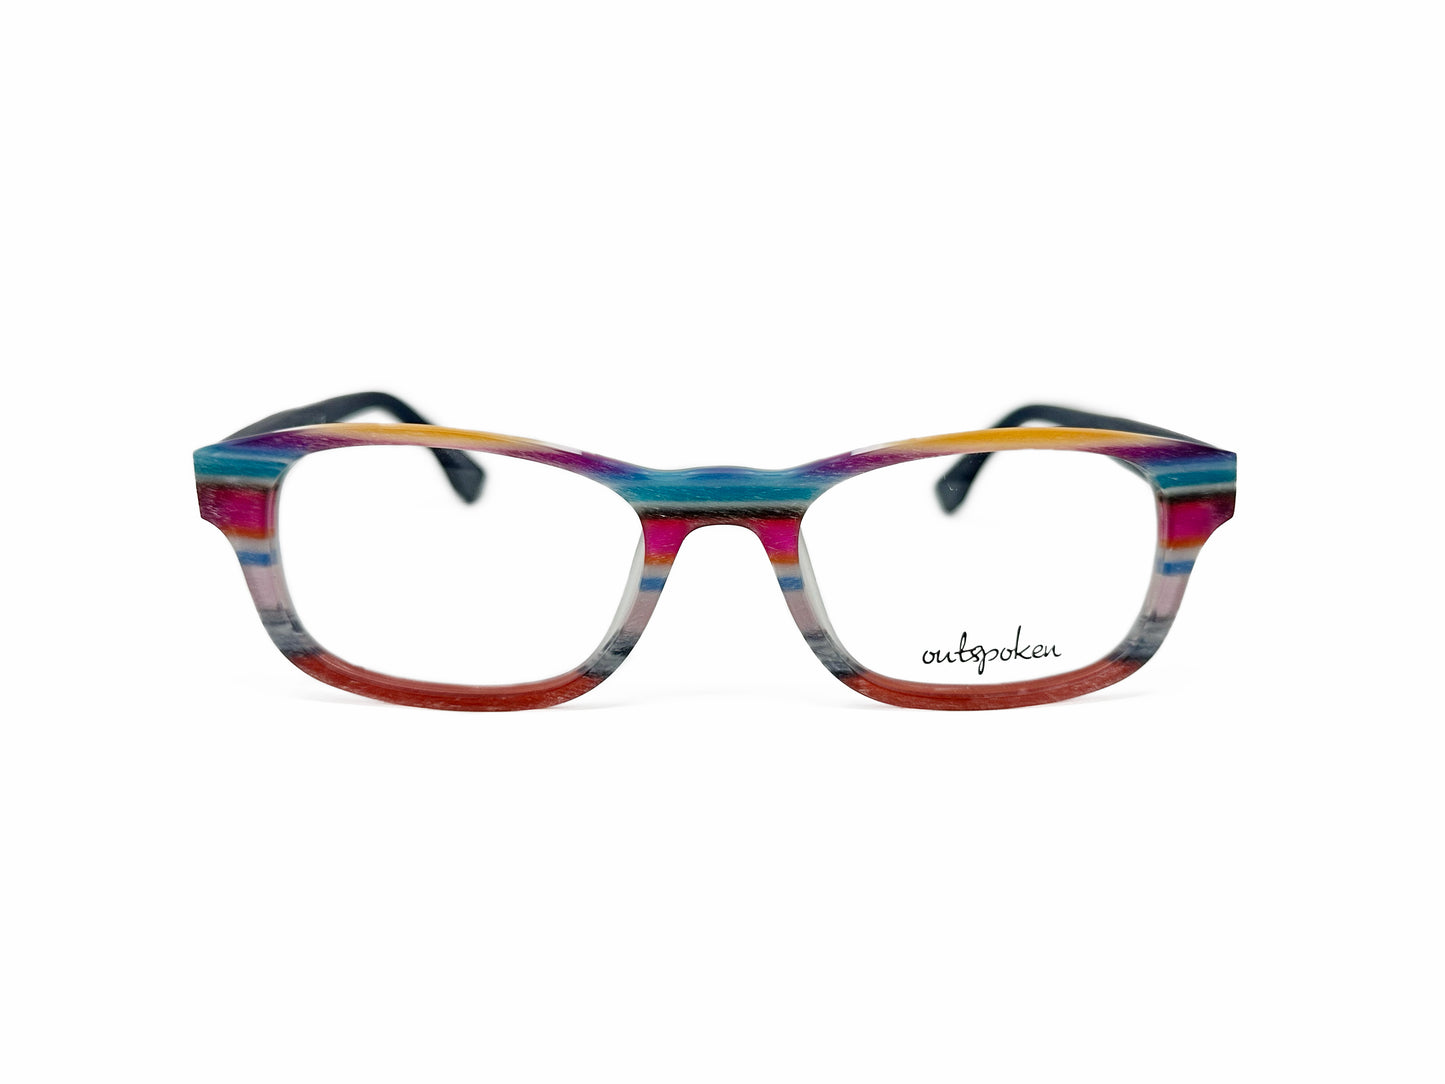 Outspoken rectangular acetate optical frame. Model: OA1508. Color: C& - red, blue, yellow stripes. Front view. 